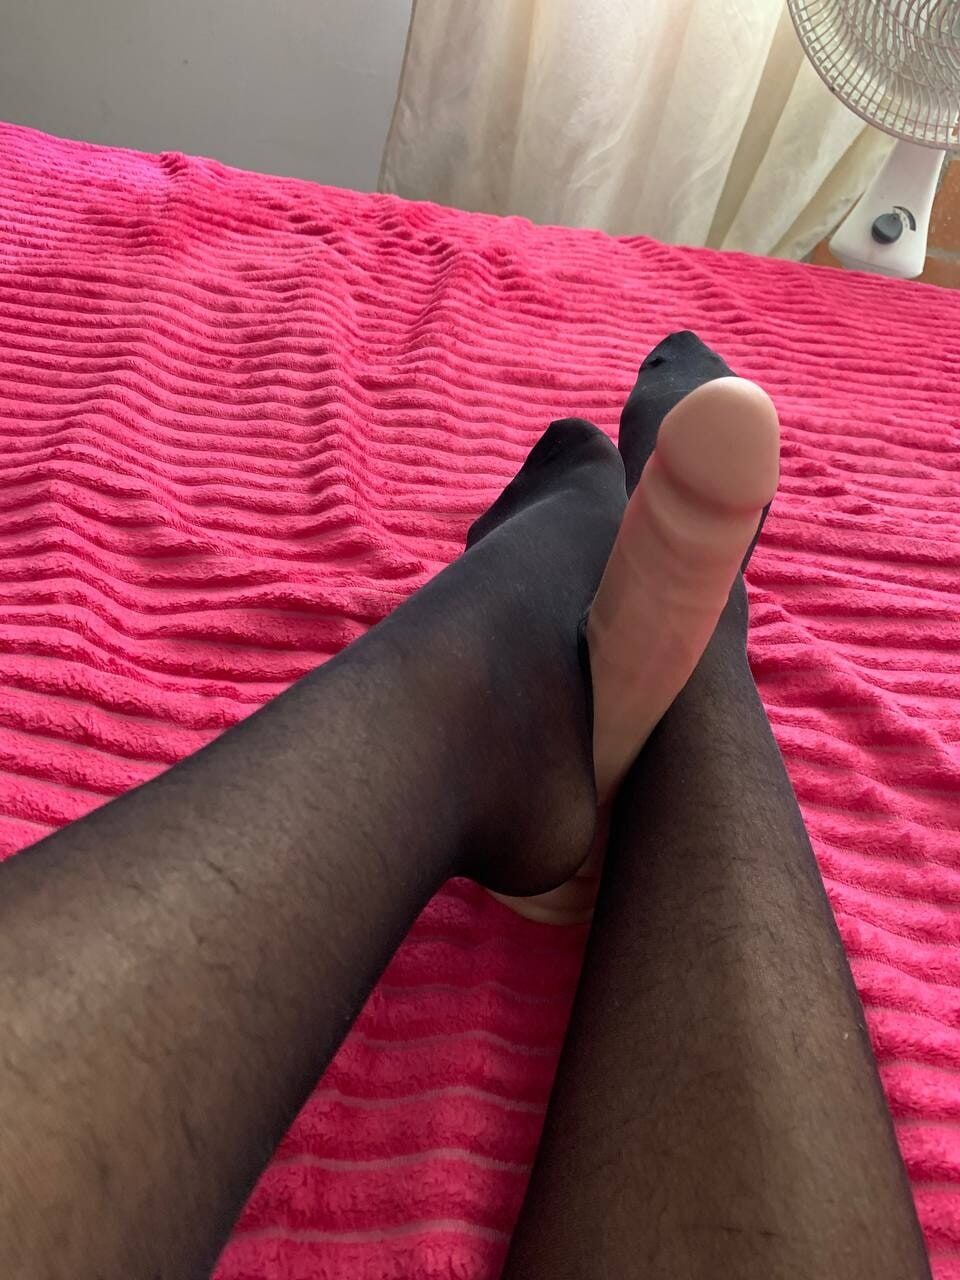 I want you to eat my beautiful feet  #7